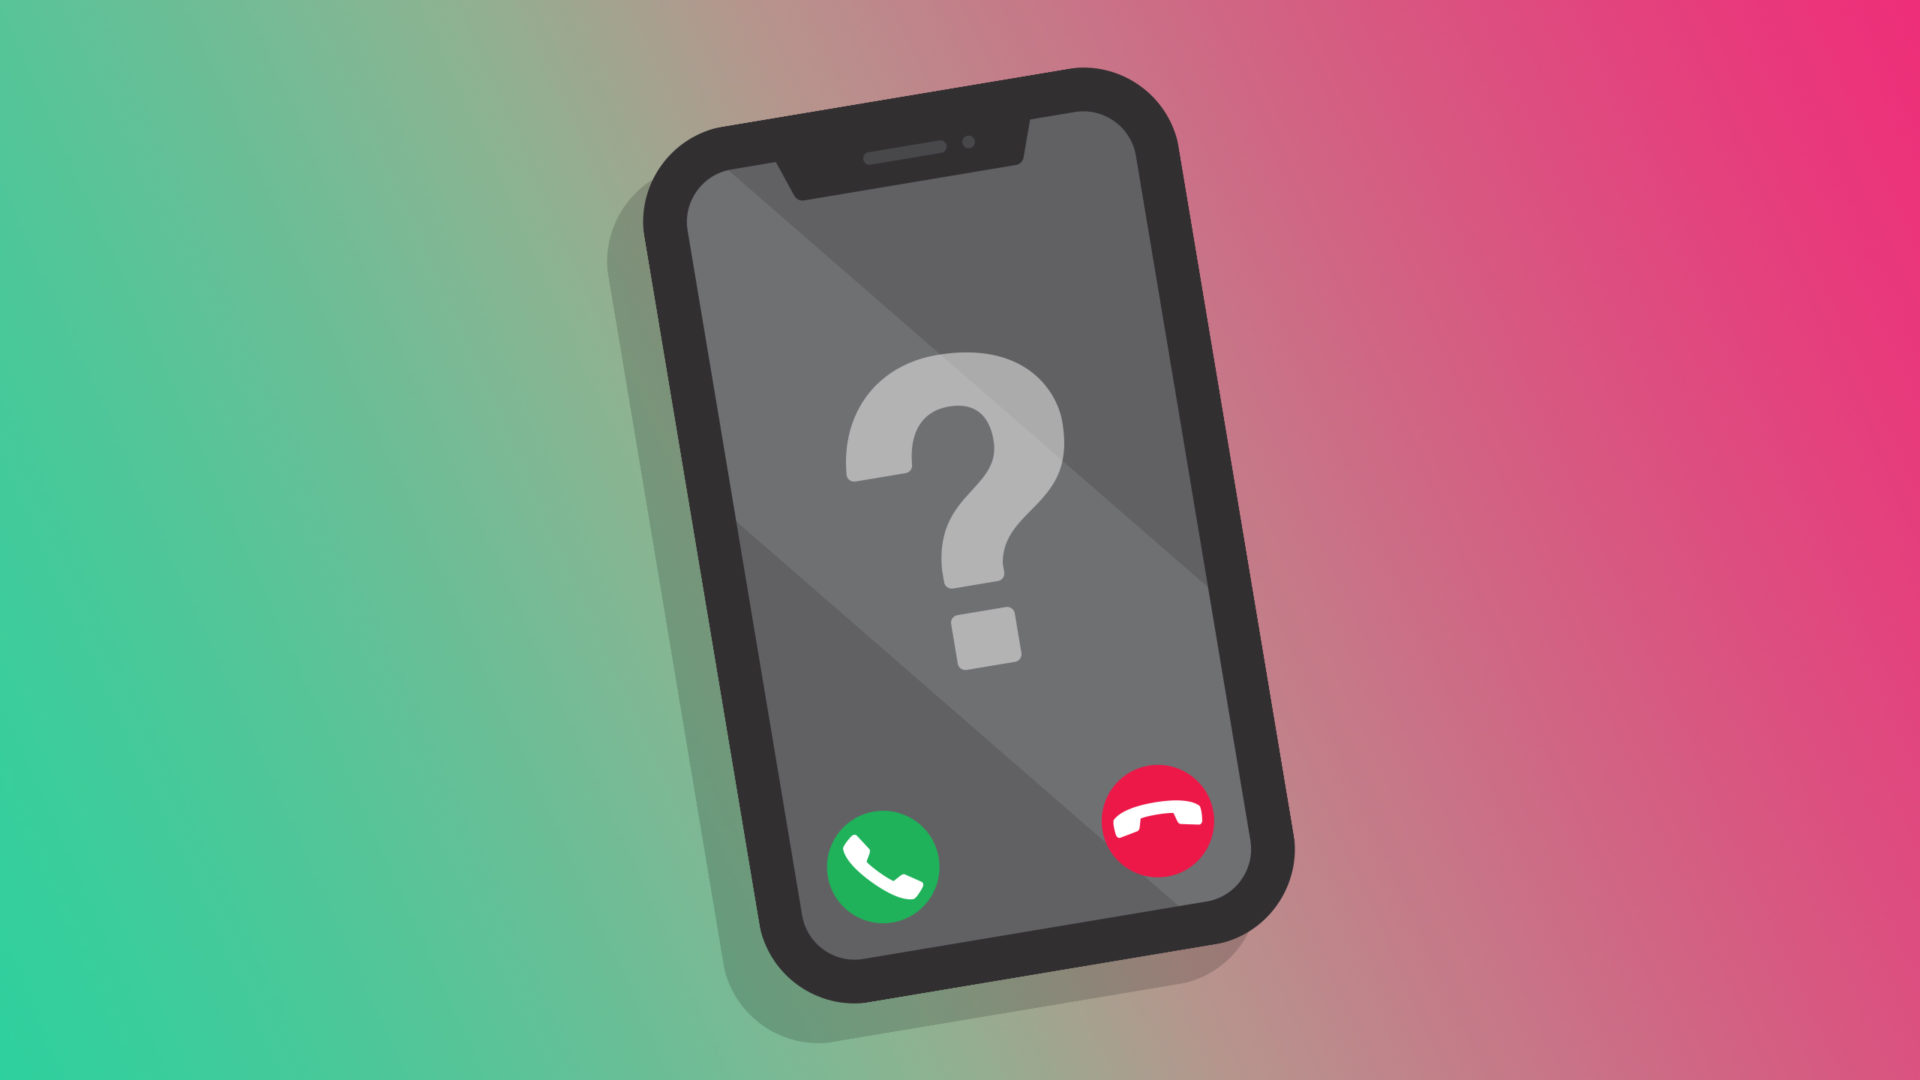 How Do I Hide My Number On iPhone? How To Make Anonymous Calls!